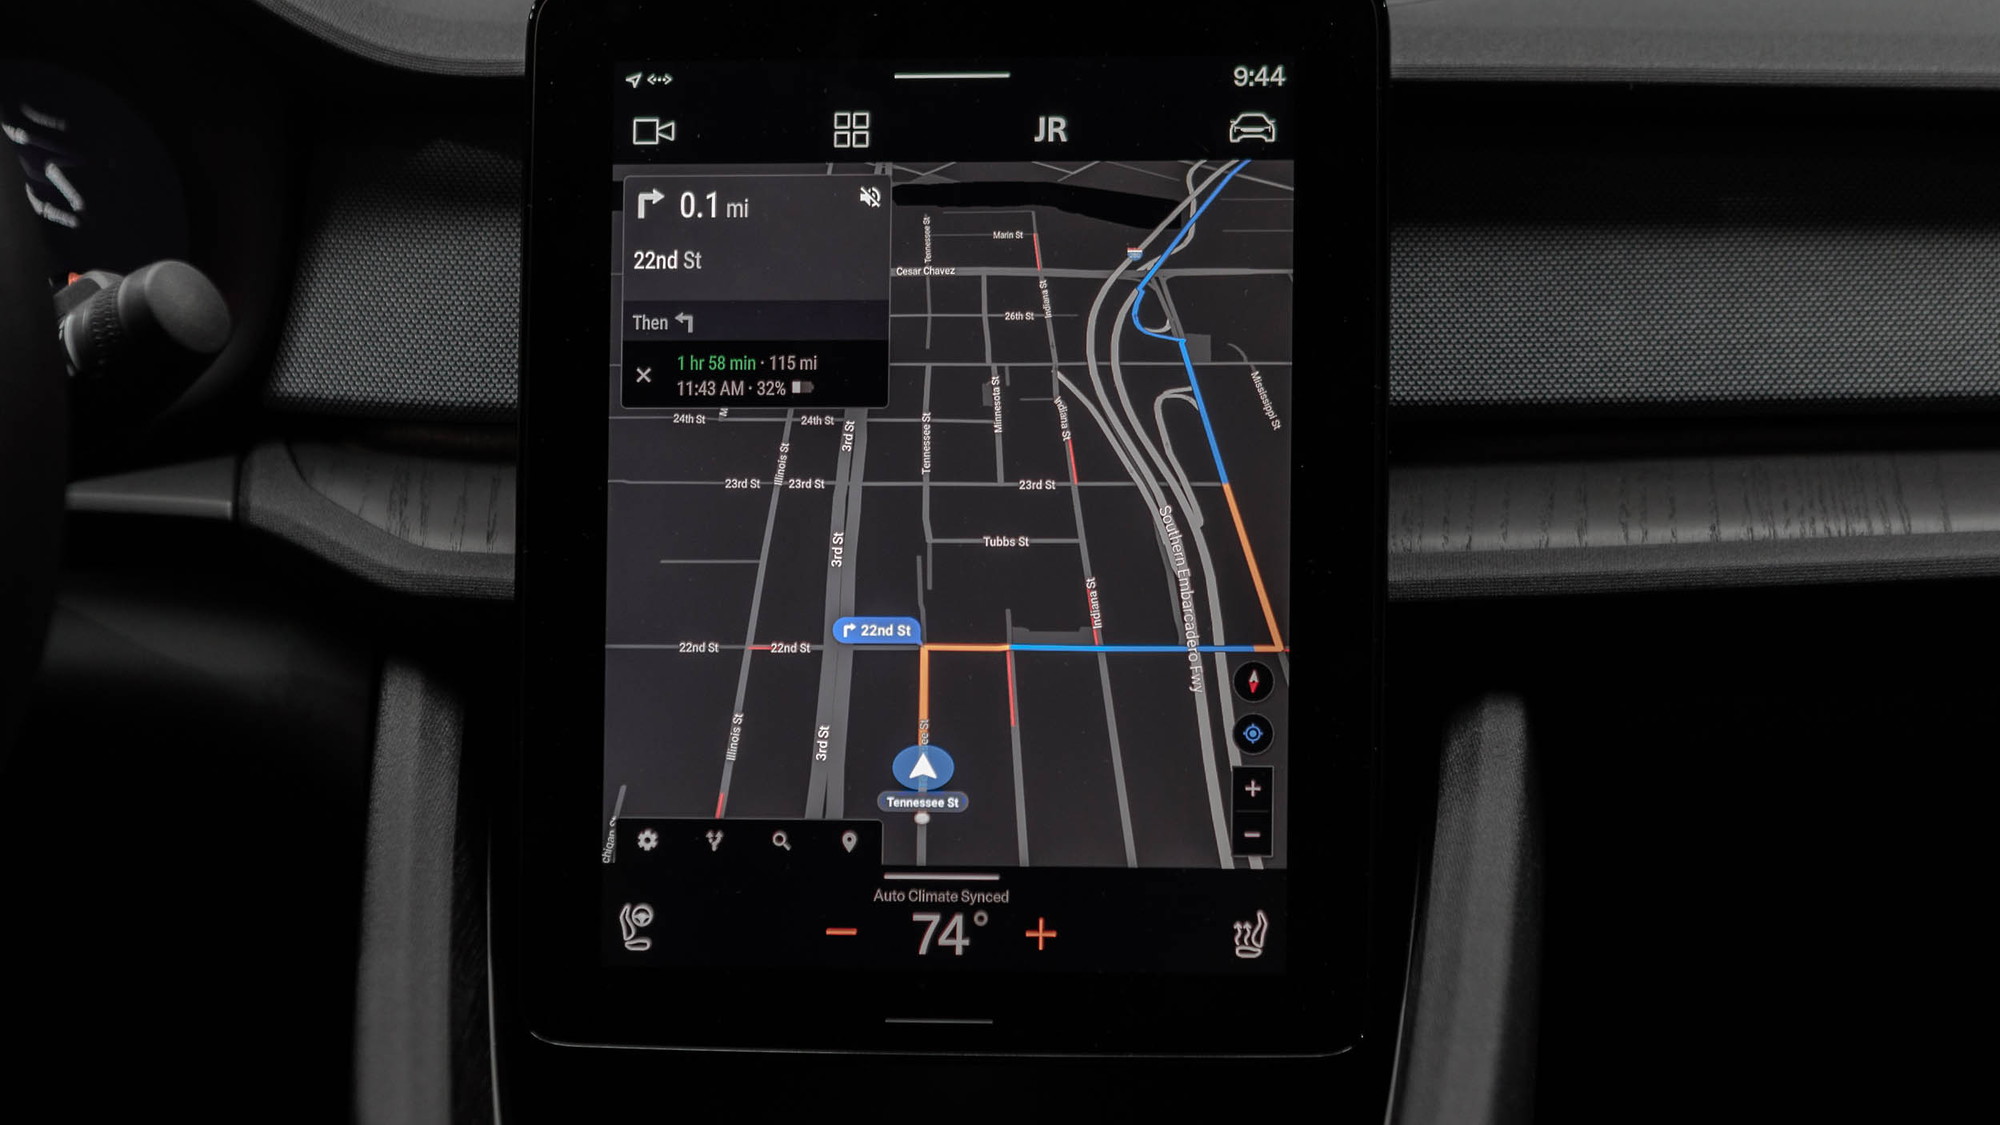 Google's Android-based infotainment in the Polestar 2